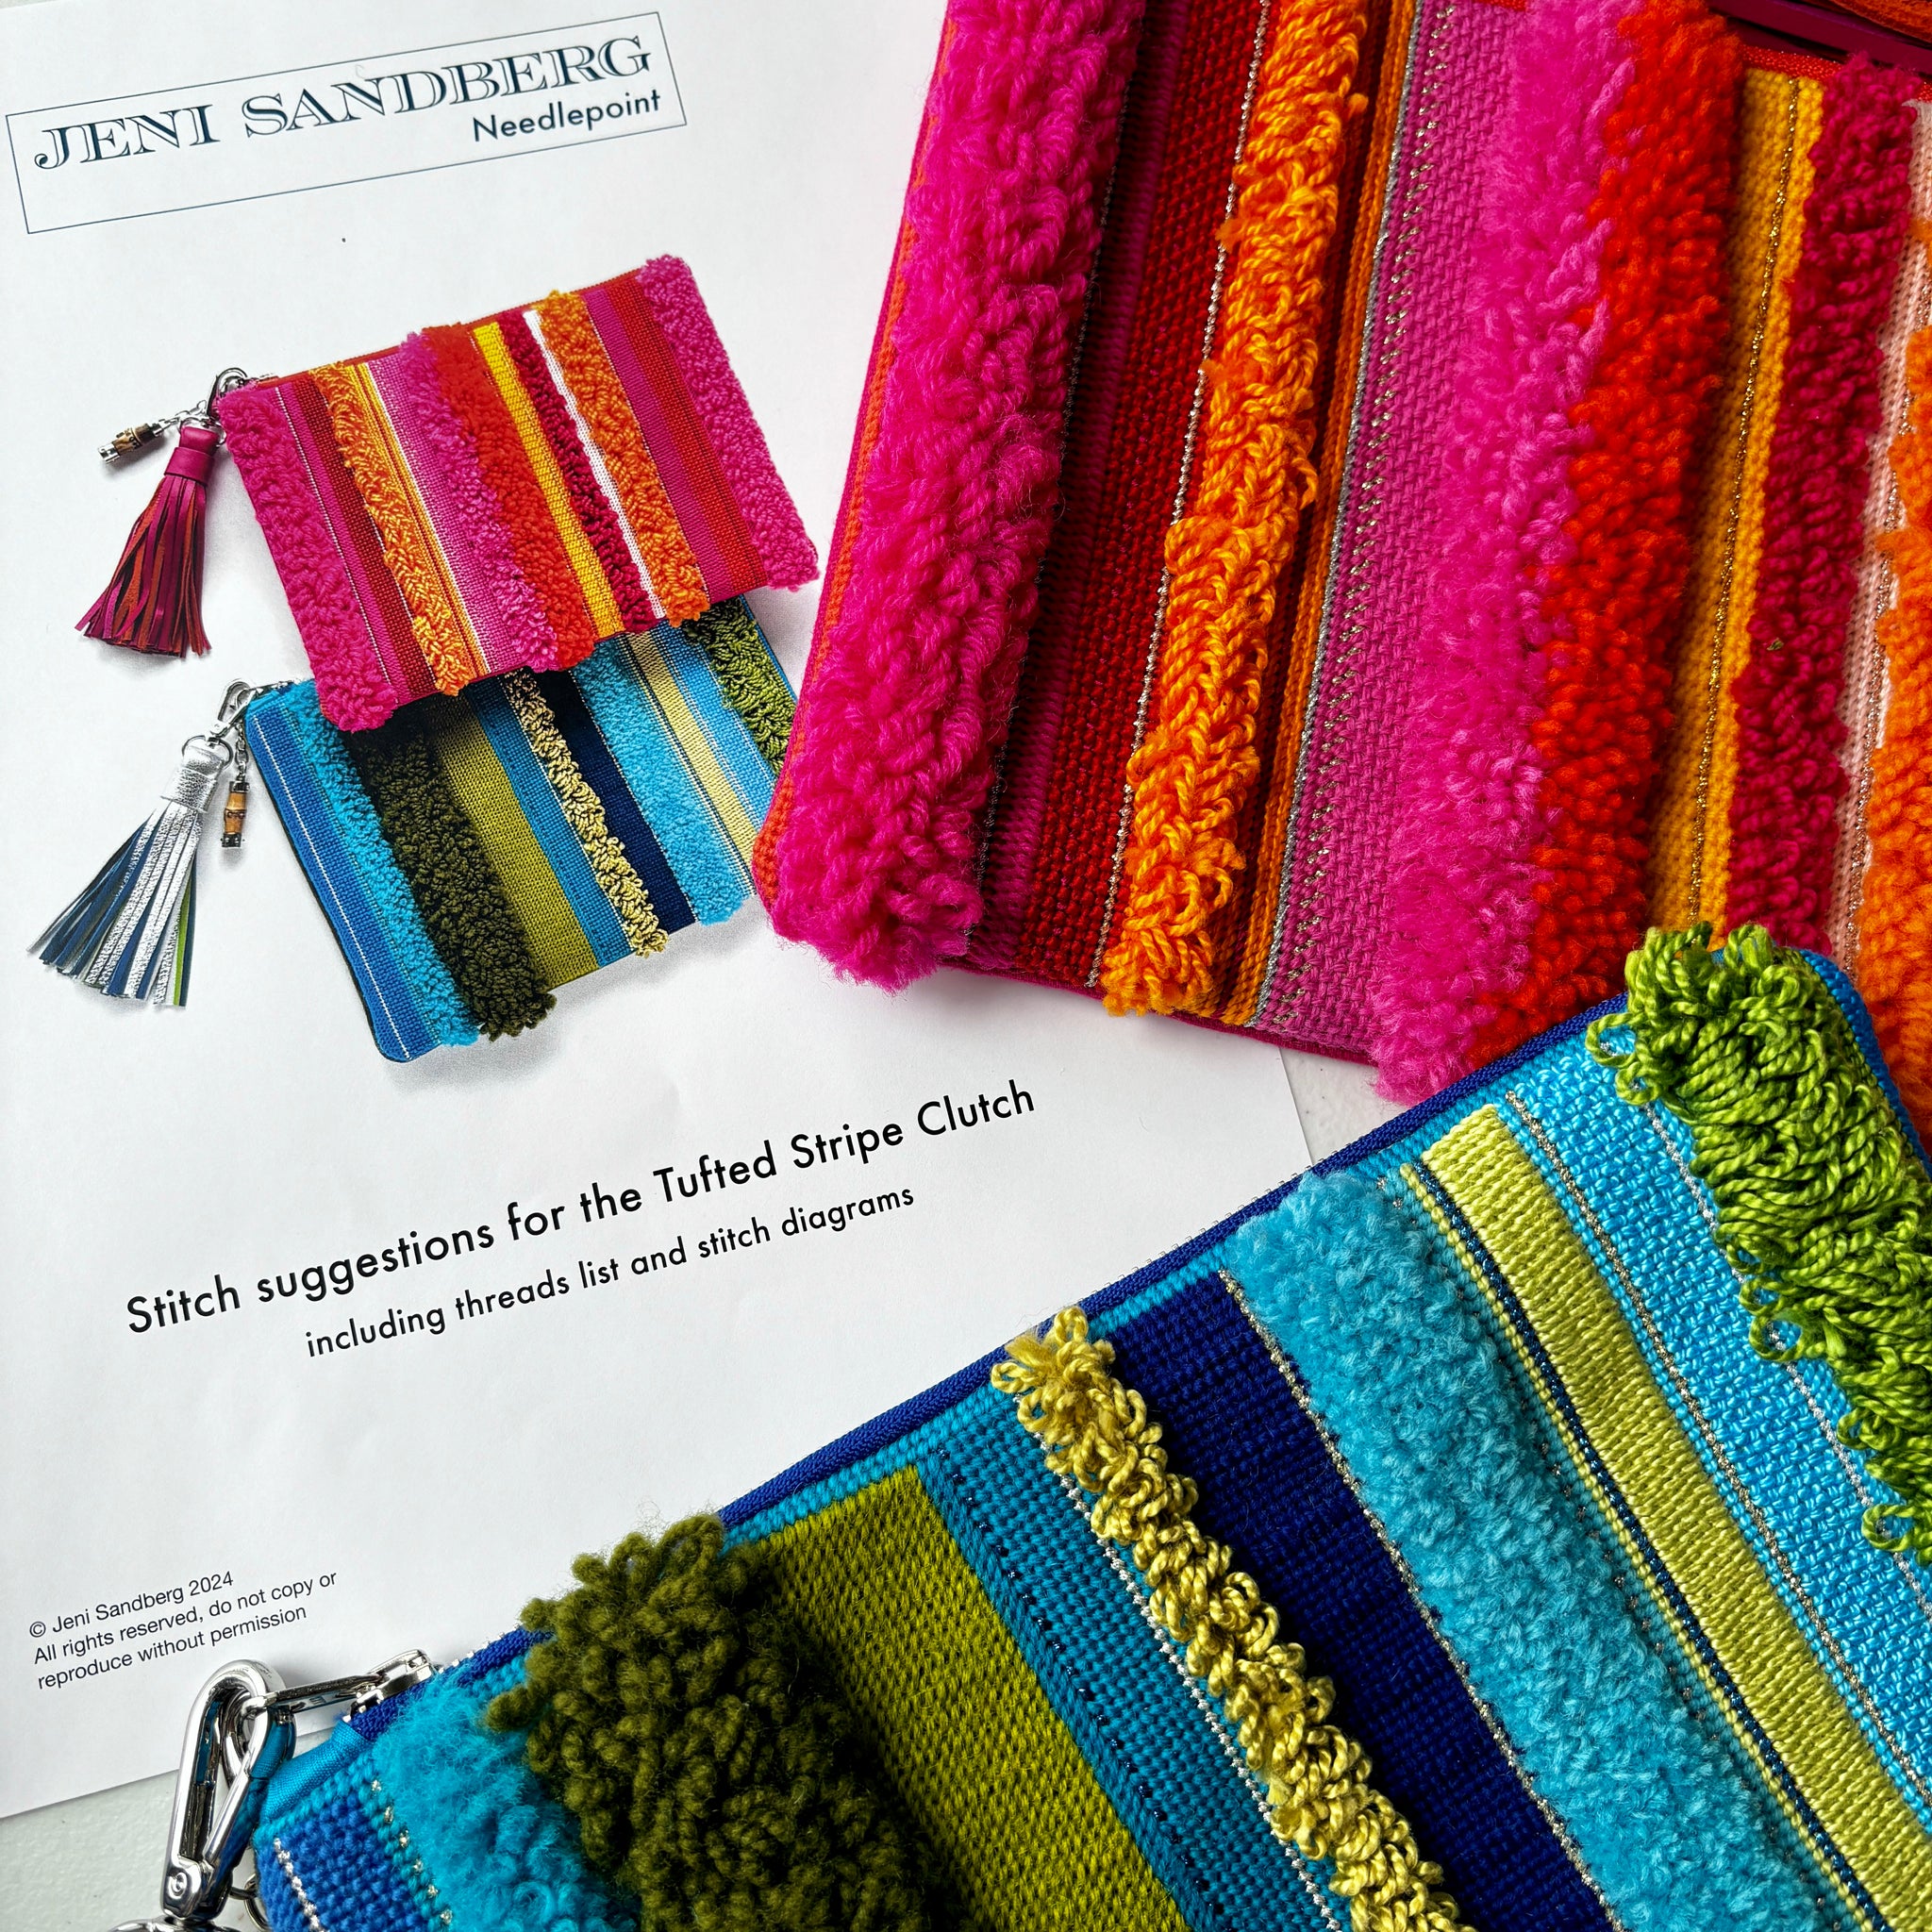 Stitch Guide for Tufted Stripe Clutches - downloadable .pdf